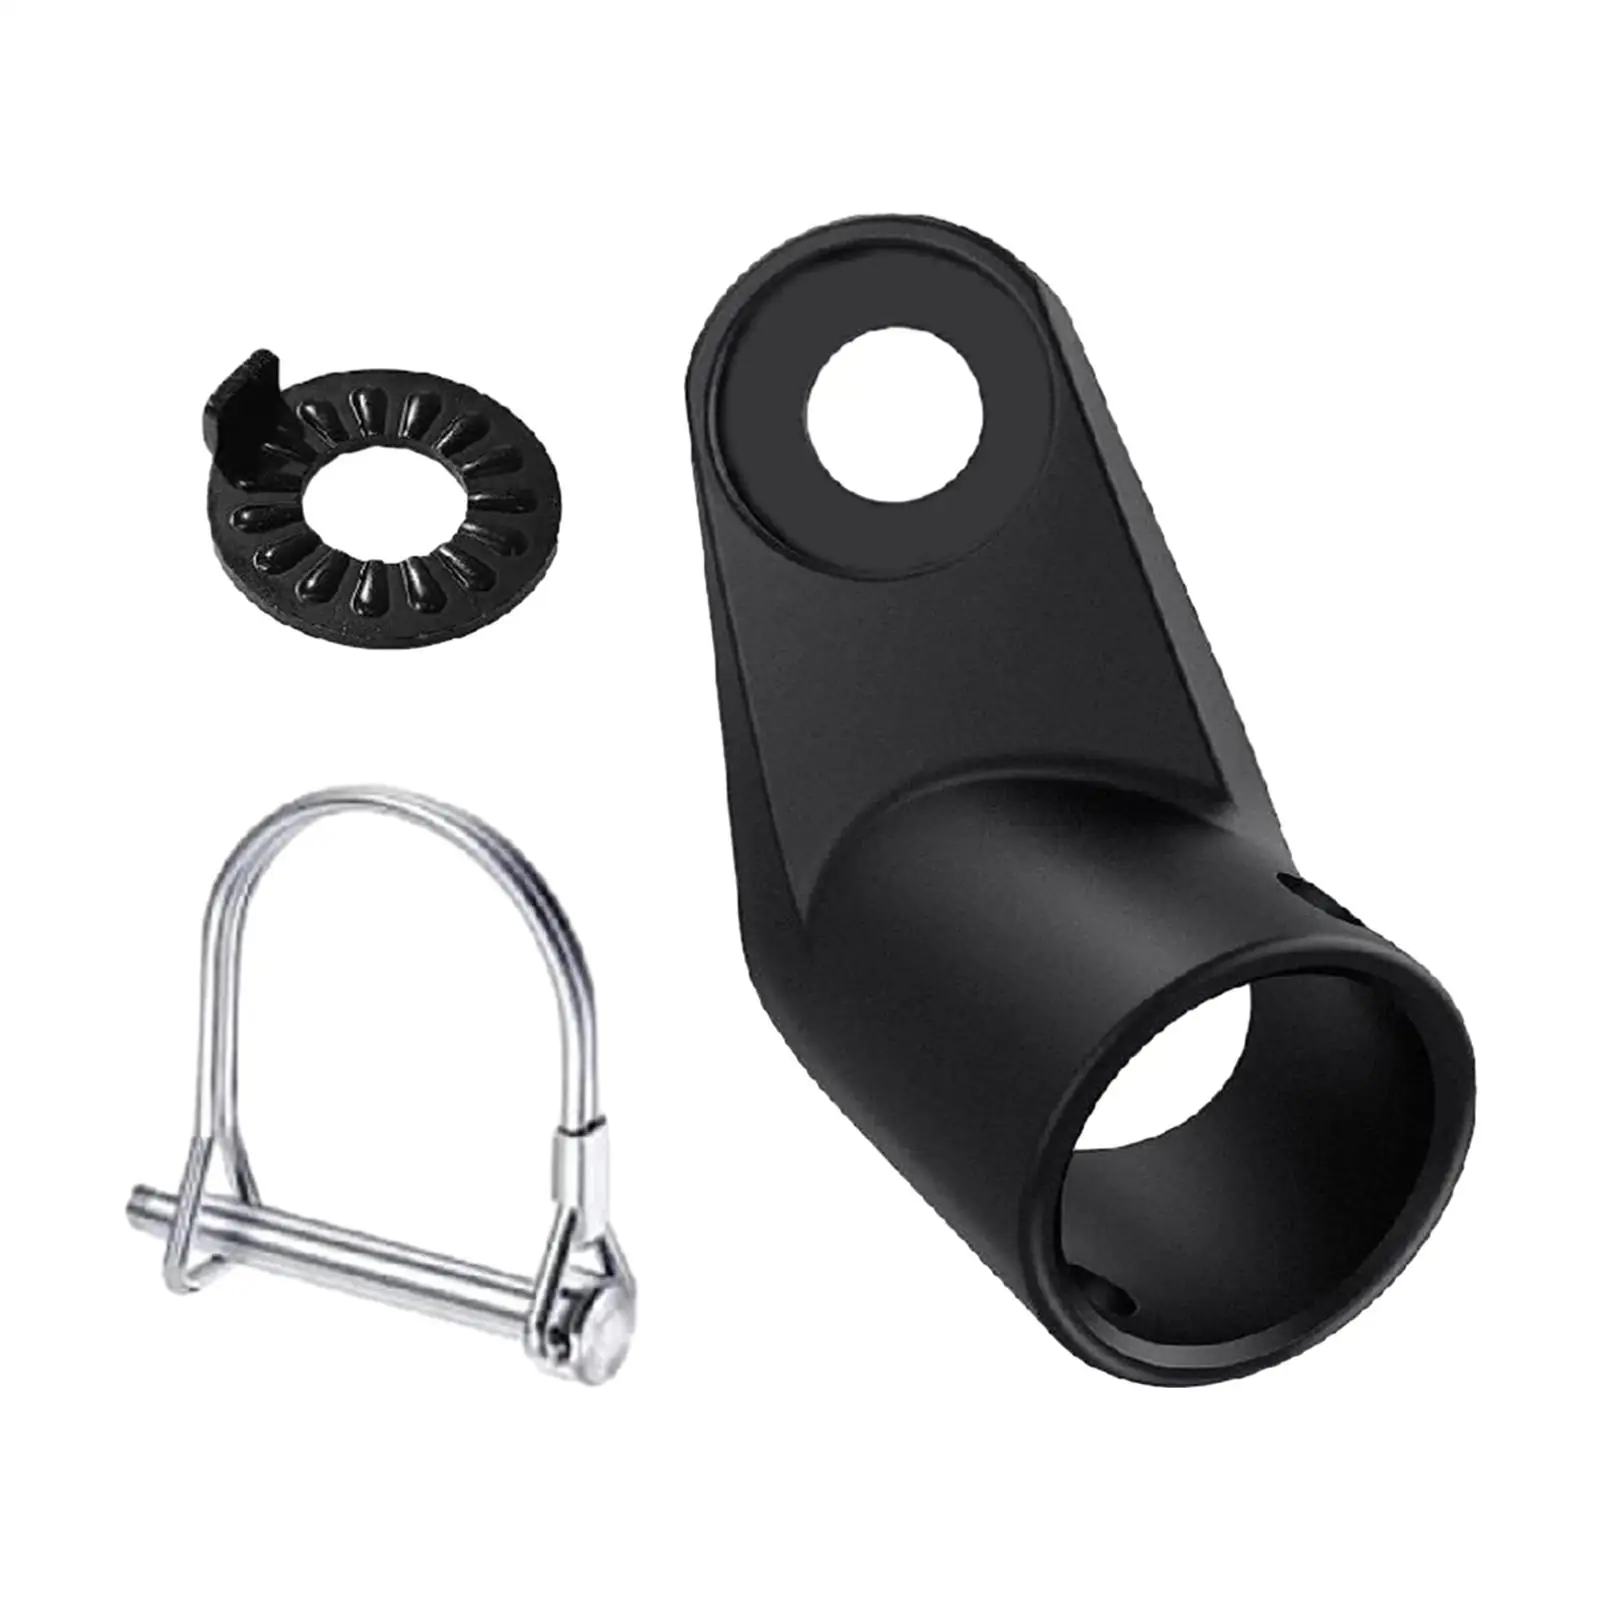 Bike Trailer Hitch Angled Elbow Metal Replacement Bike Trailer Attachment Cycling Equipment for Kids Bikes Pets Trailers